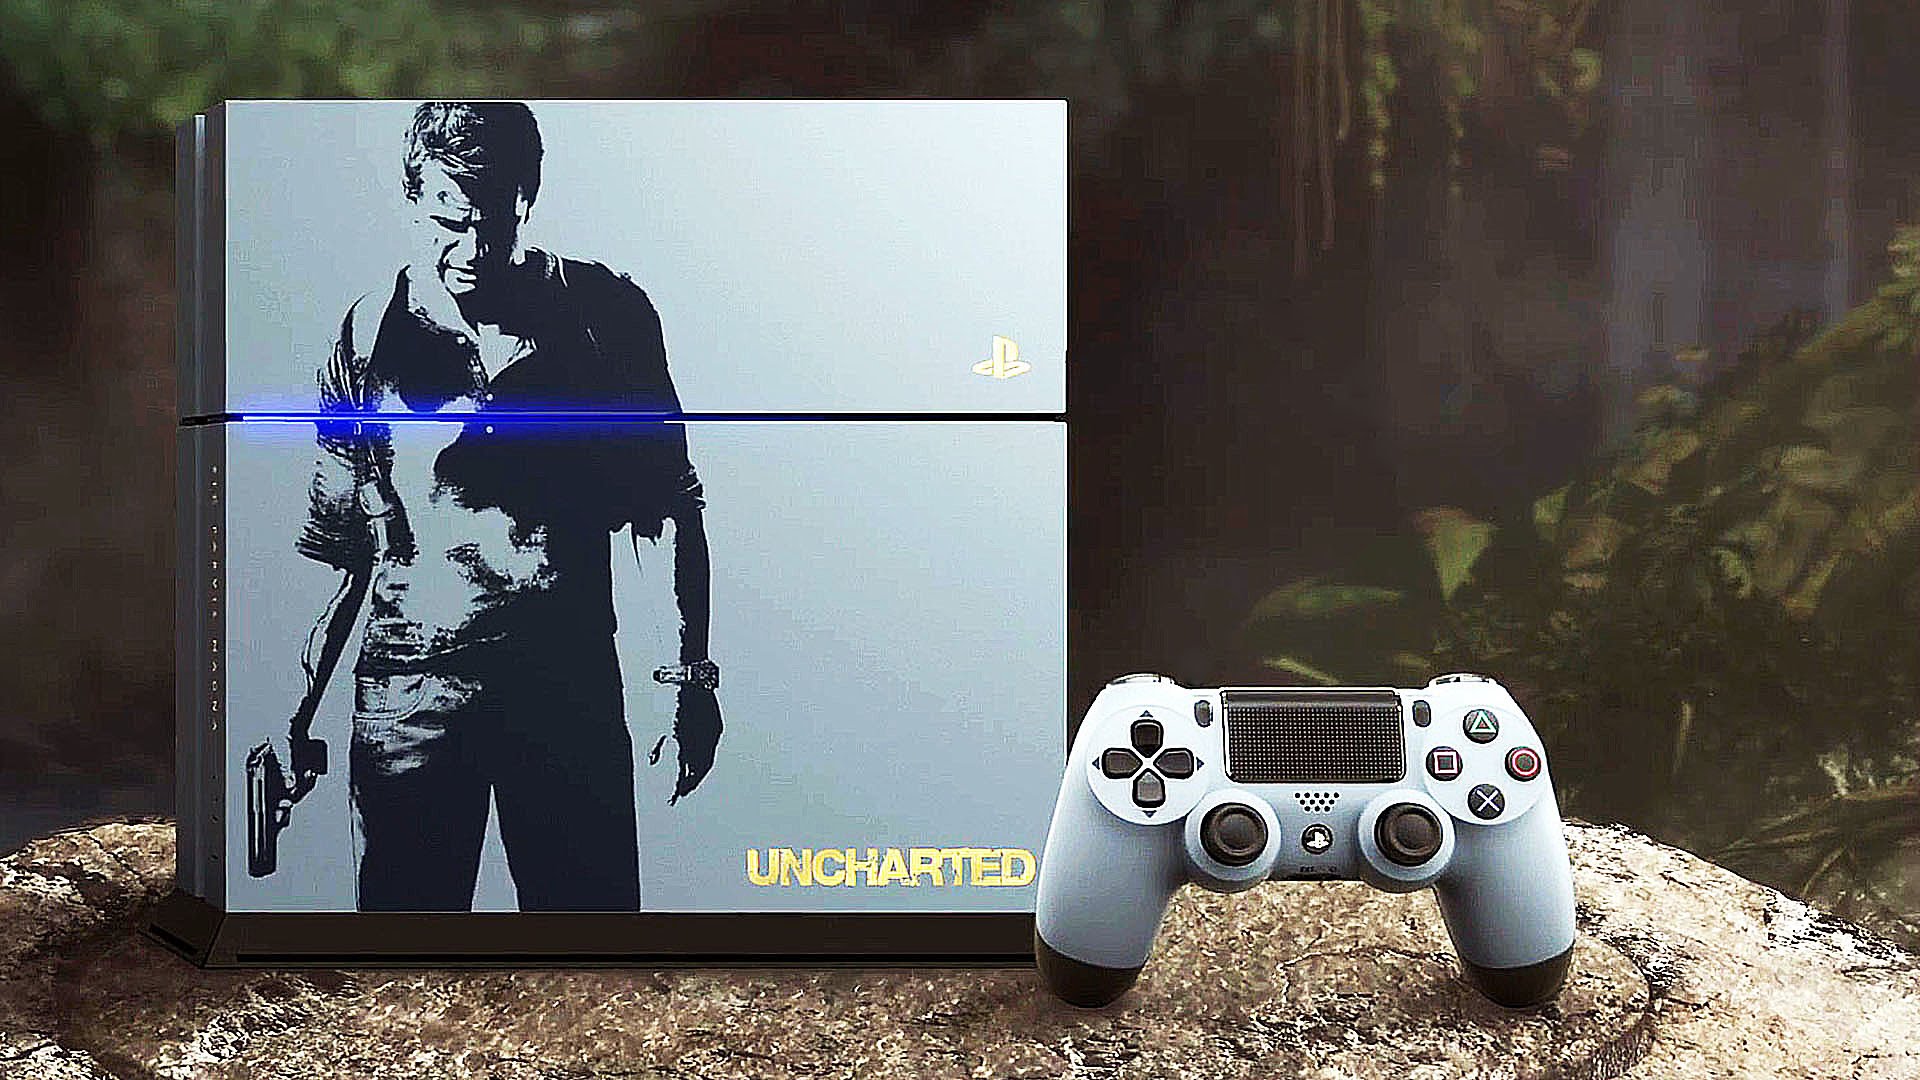 Unbound ps4. Ps4 Uncharted 4 Limited. Uncharted PLAYSTATION 4 Limited Edition. Ps4 Uncharted 4 Limited Edition. Sony ps4 Uncharted 4:.